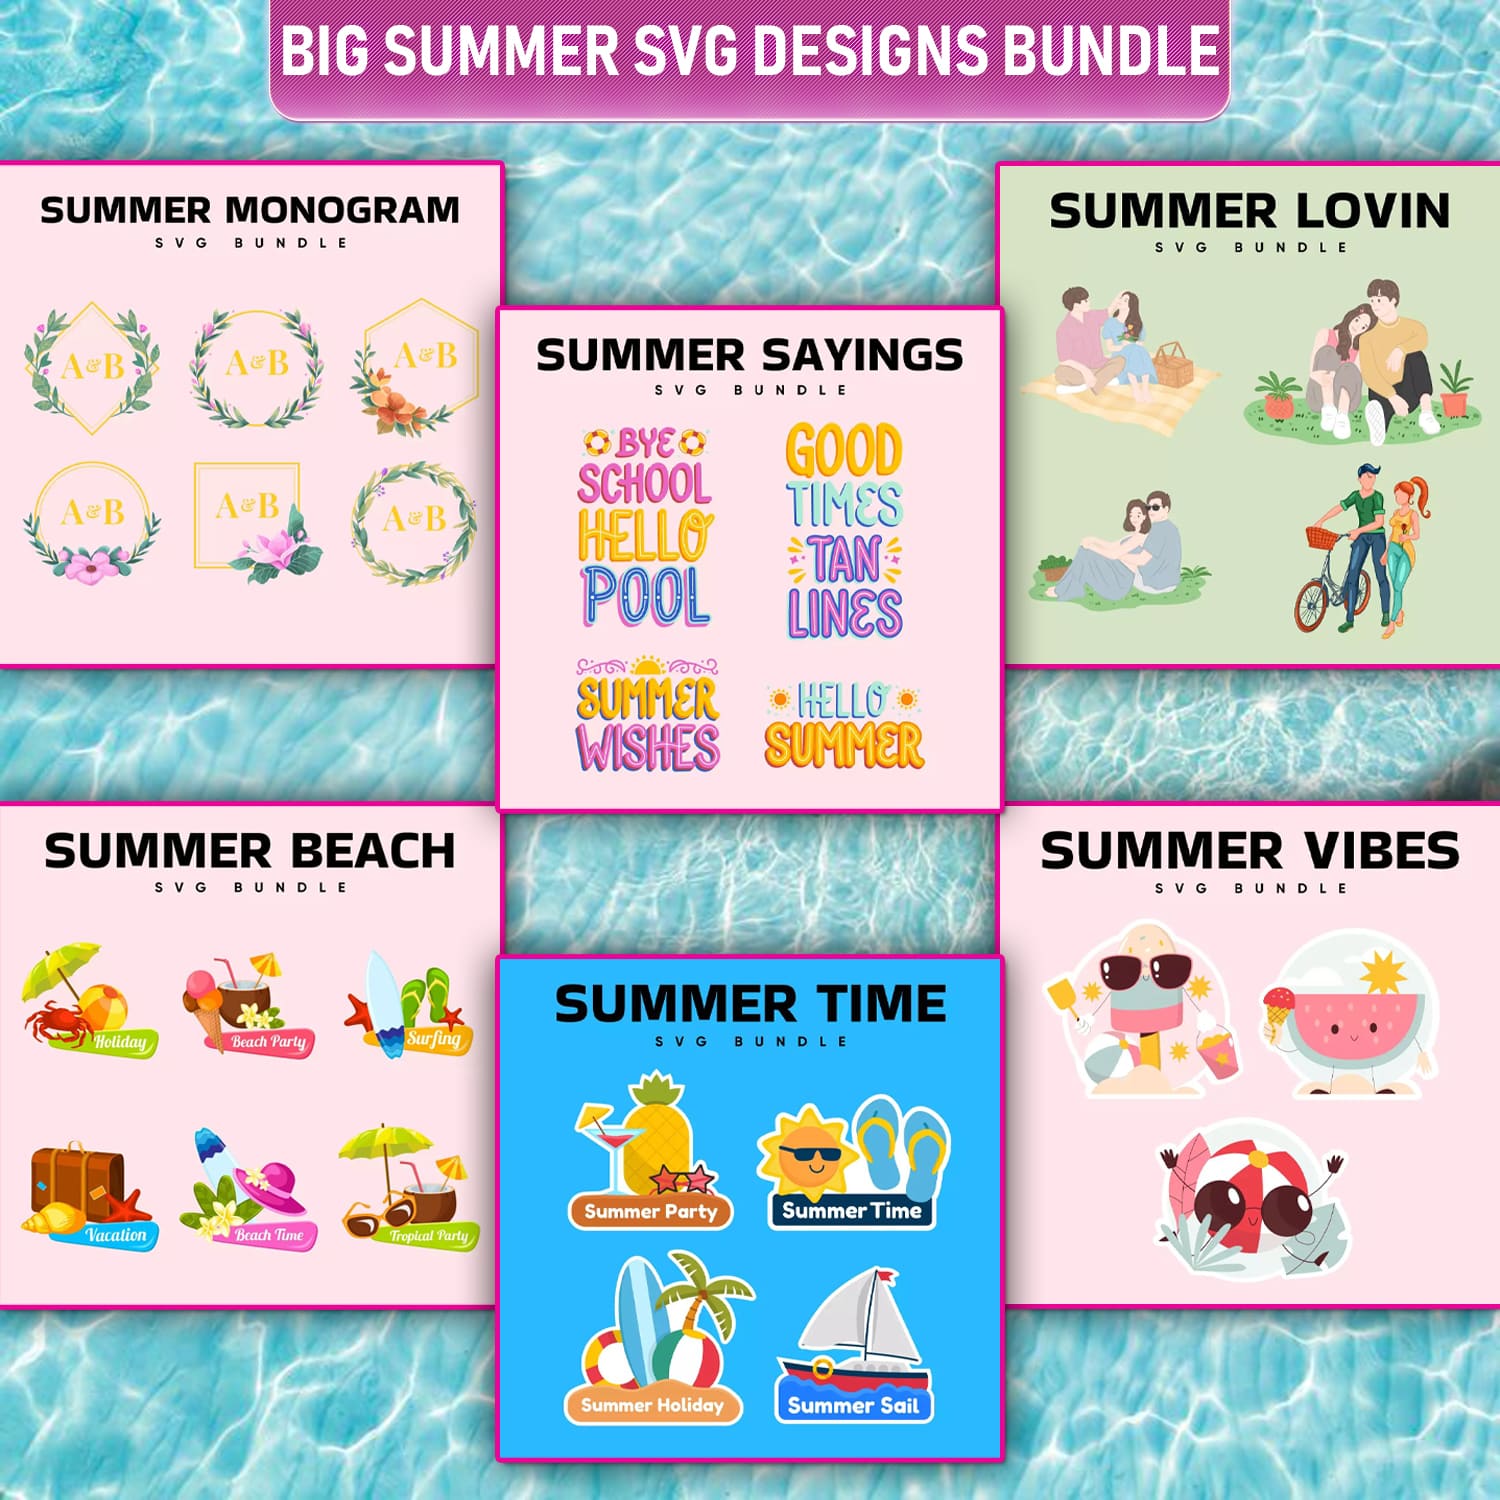 A pack of gorgeous images on a summer theme.